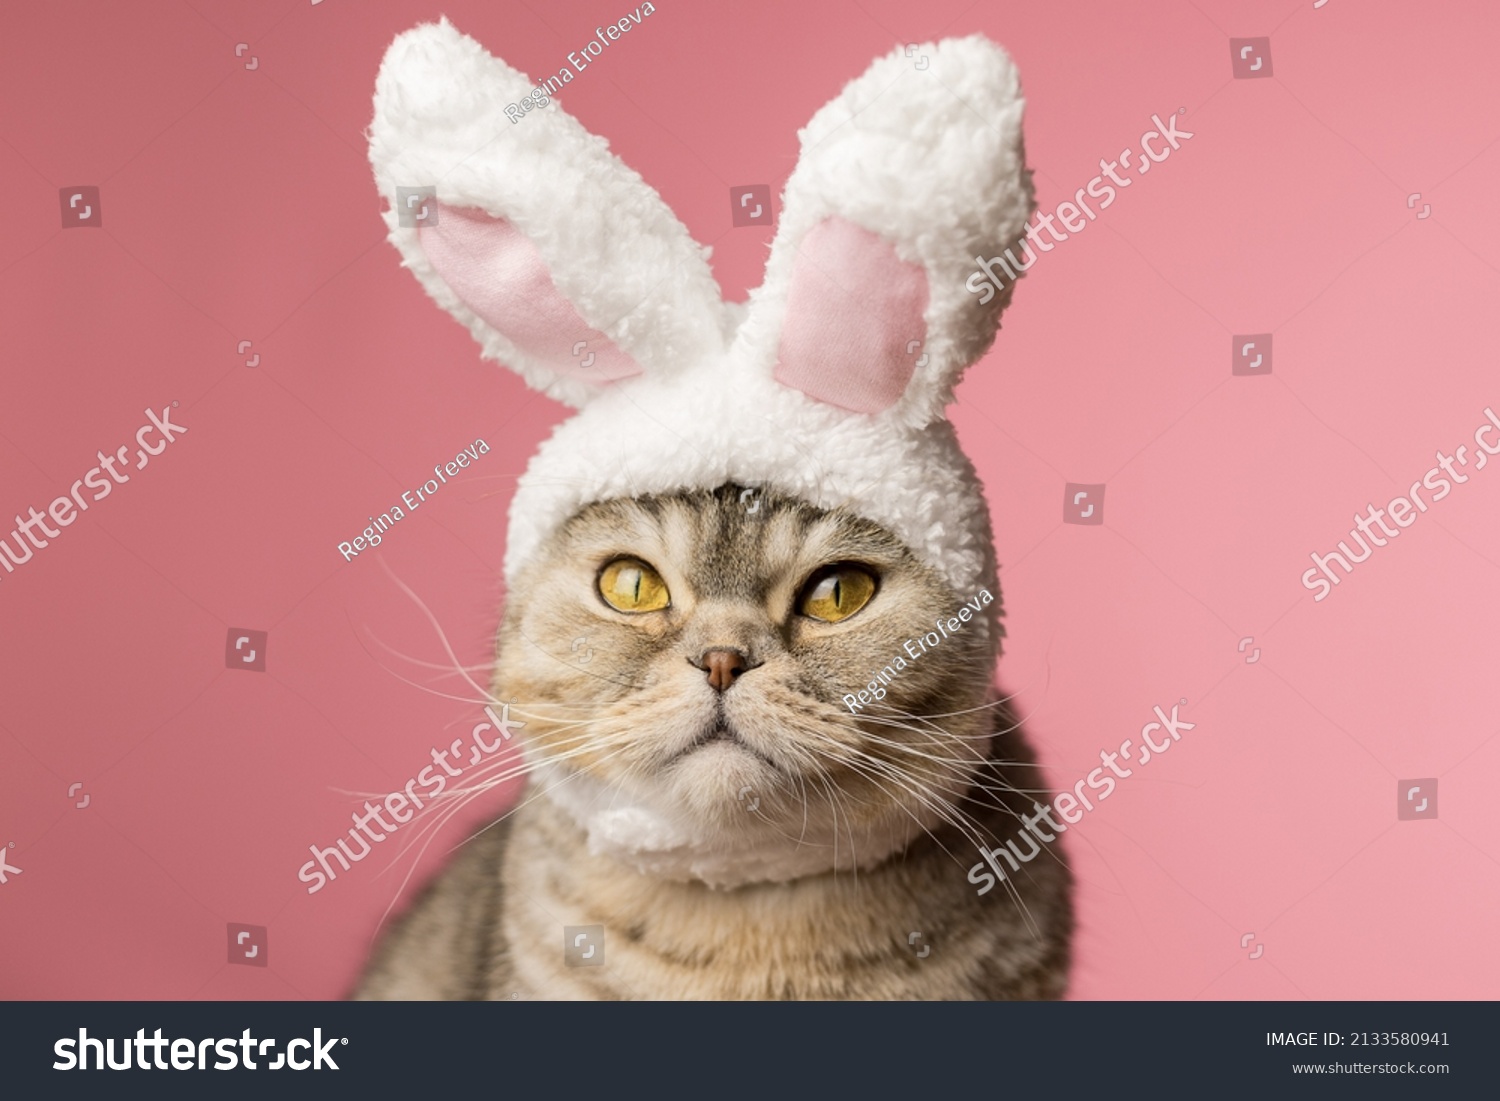 Funny fat cat with bunny ears on a pink background, close-up. A cat dressed as an Easter bunny. Happy Easter. #2133580941